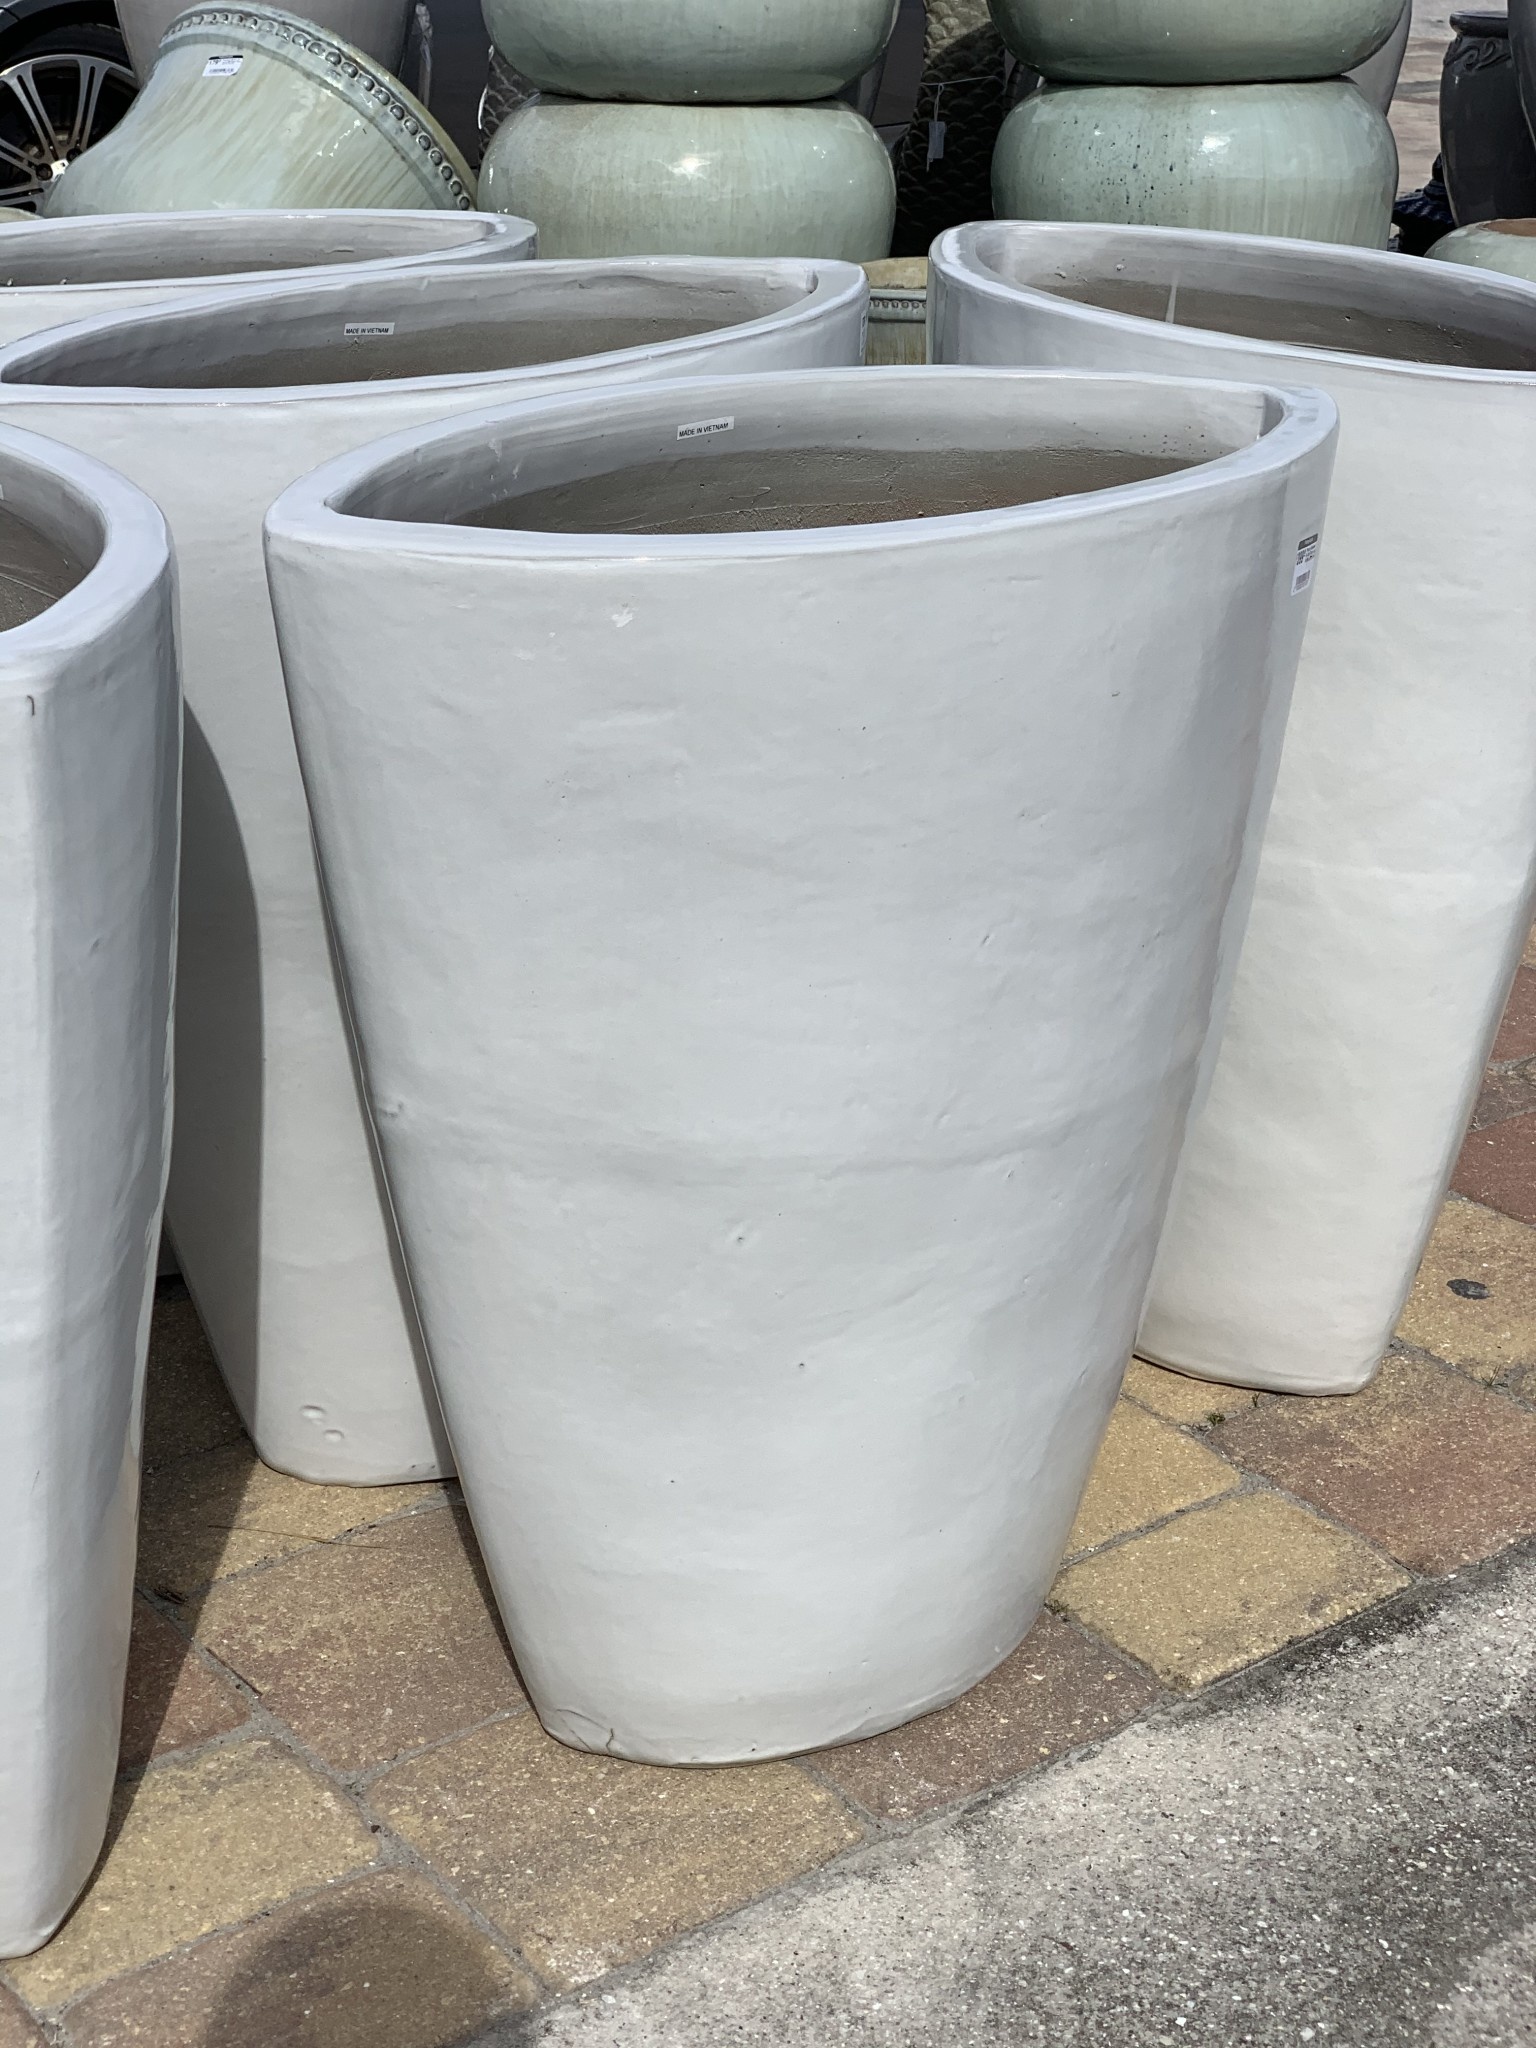 Shallow Oval Planter at Wholesale Prices - NewPro Containers